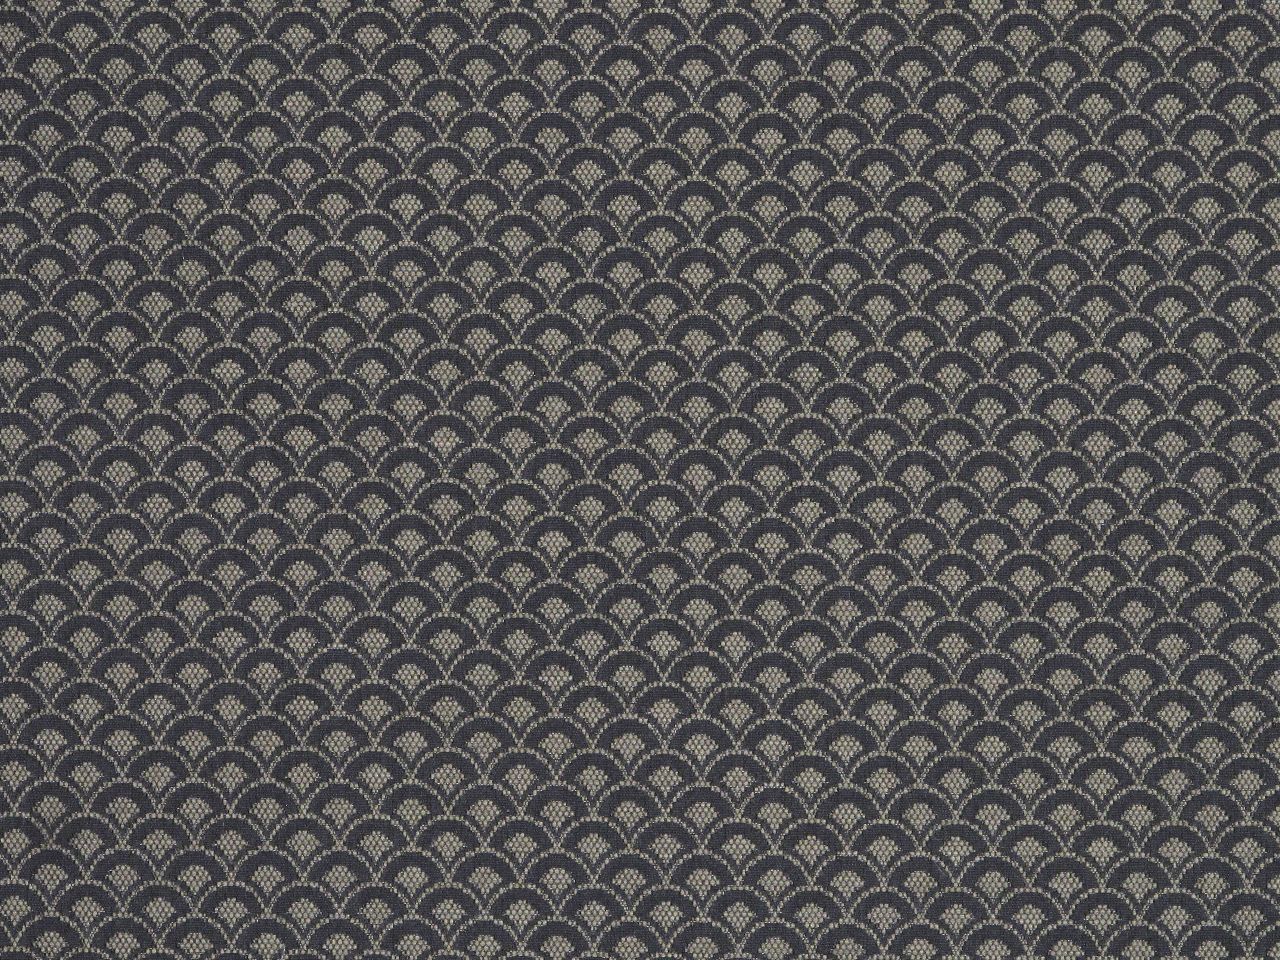 Zane fabric in taupe black (reversible) color - pattern number GH 00031186 - by Scalamandre in the Old World Weavers collection